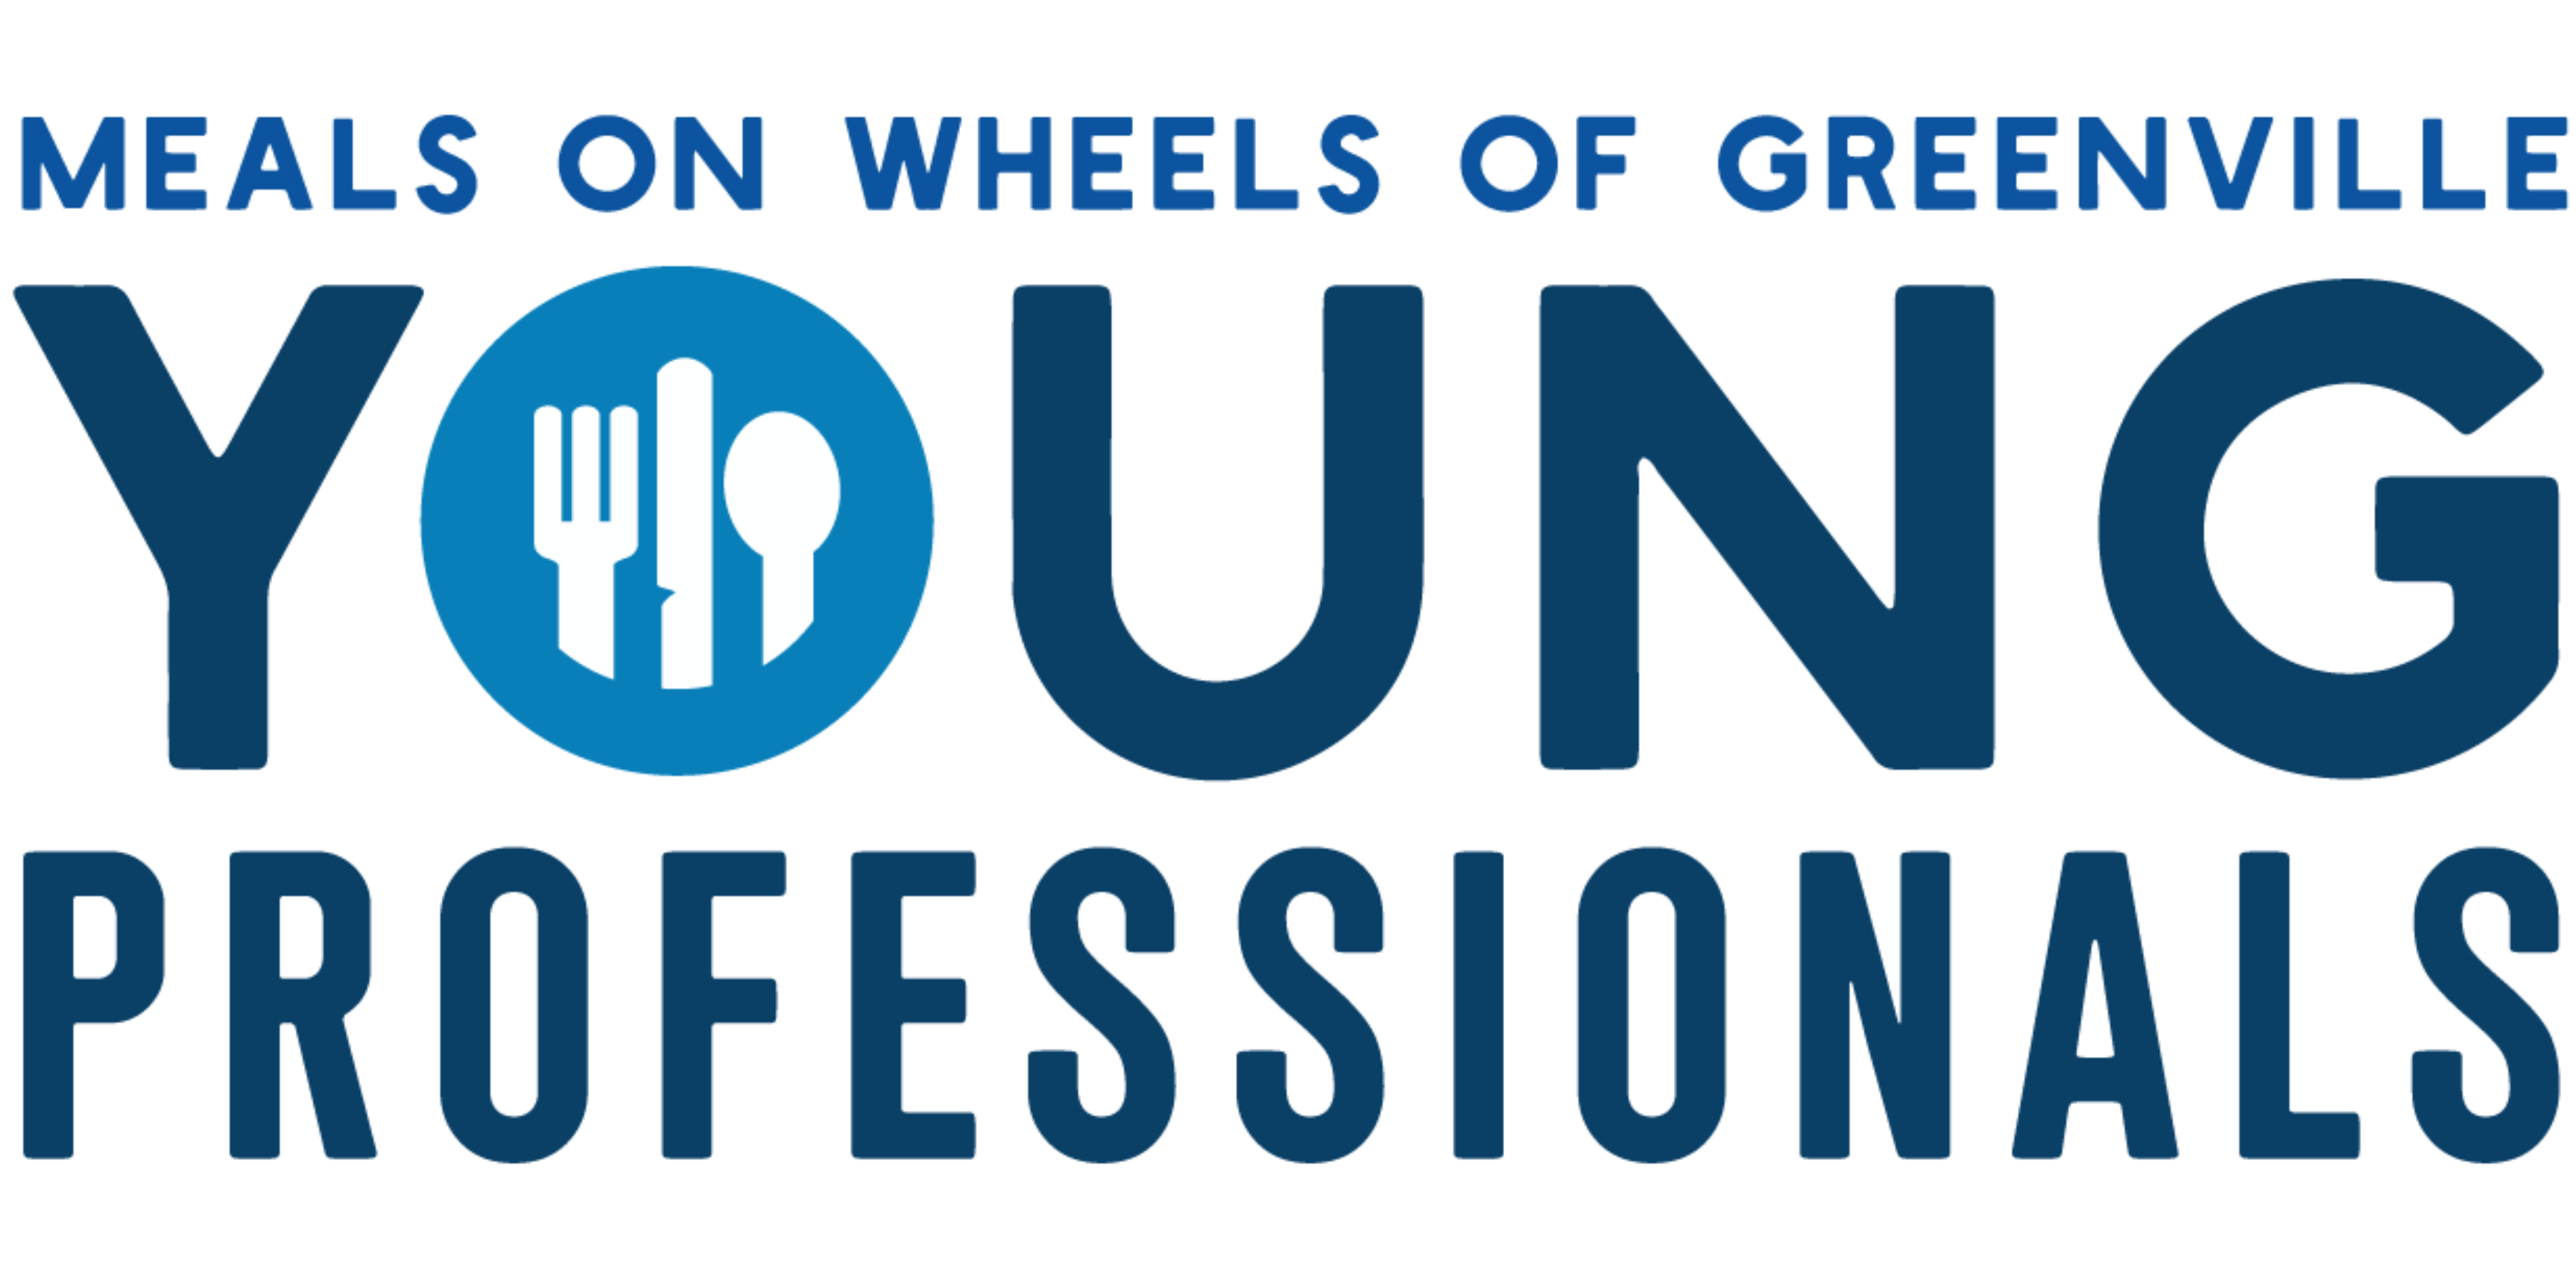 Meals on Wheels of Greenville County